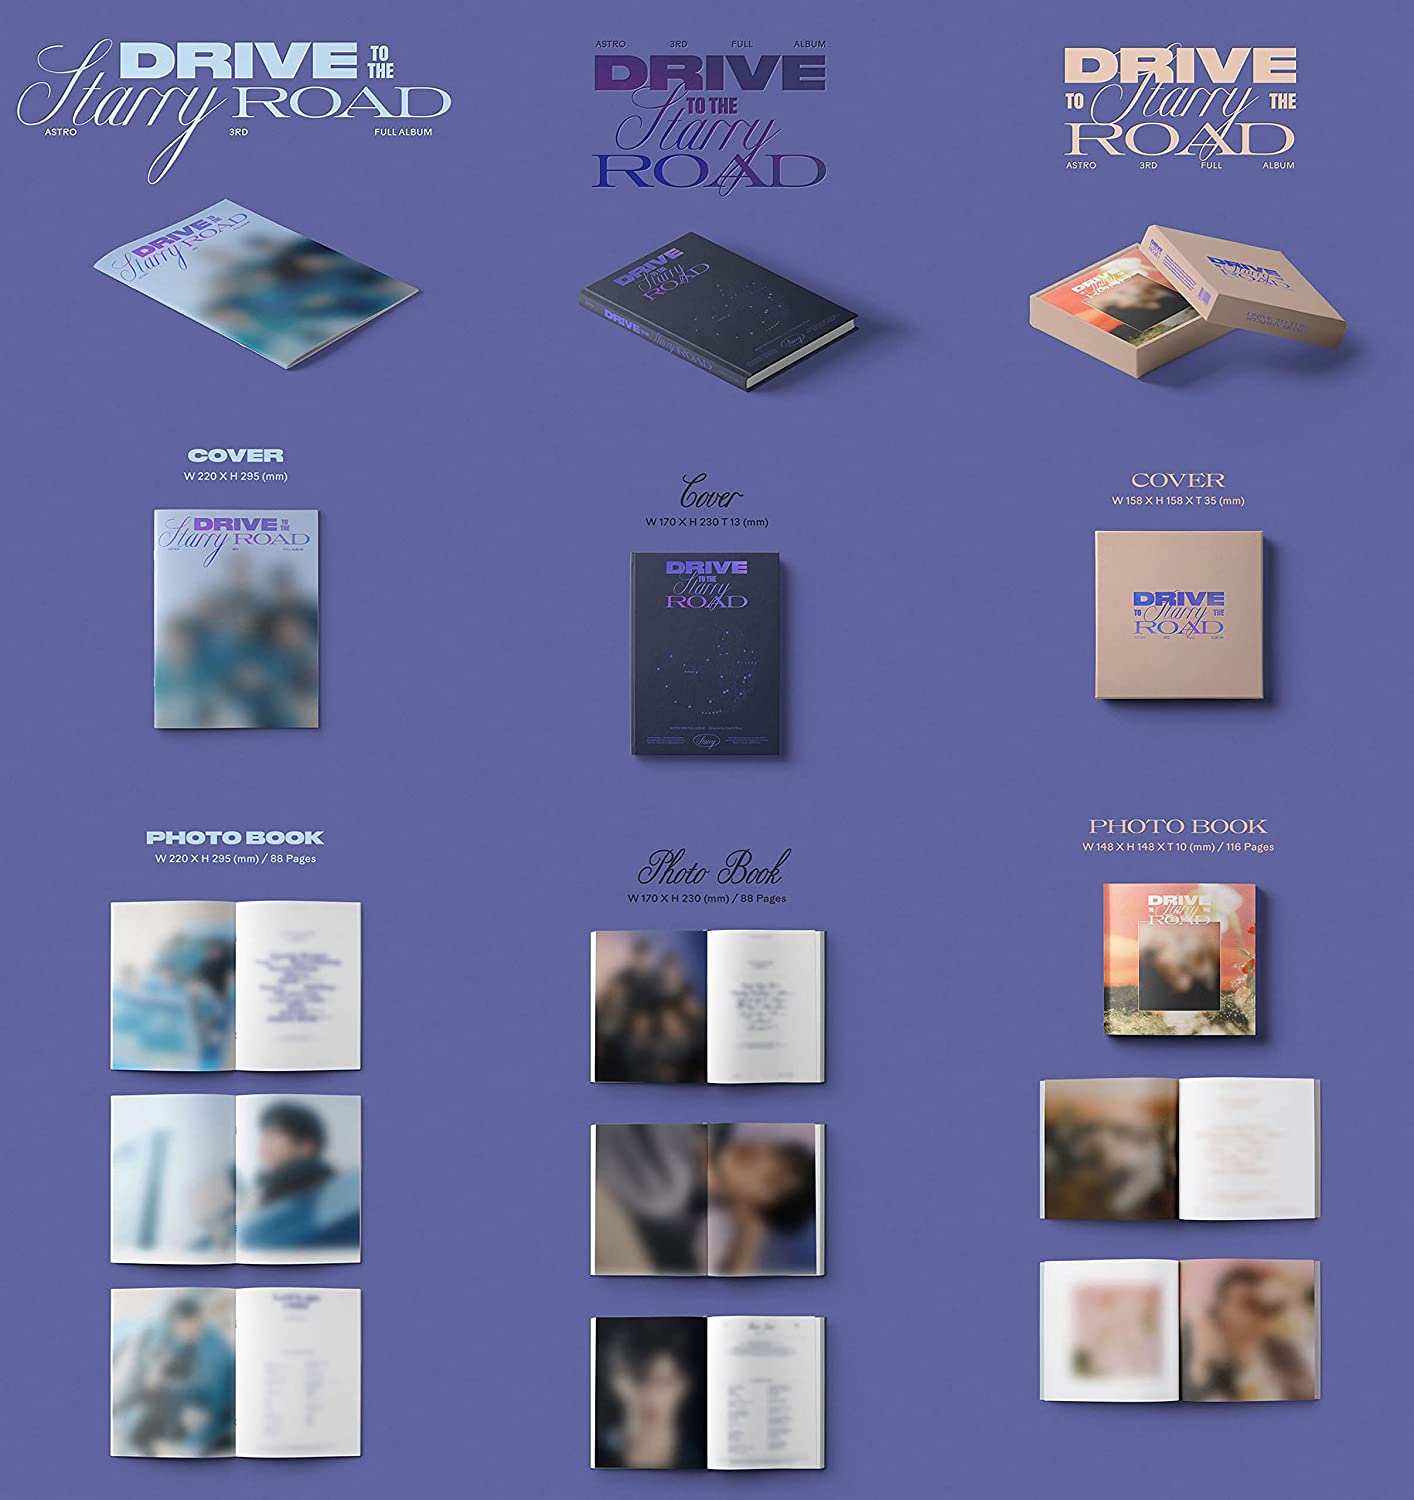 K-Pop CD Astro - 3rd Full Album 'Drive to the Starry Road'